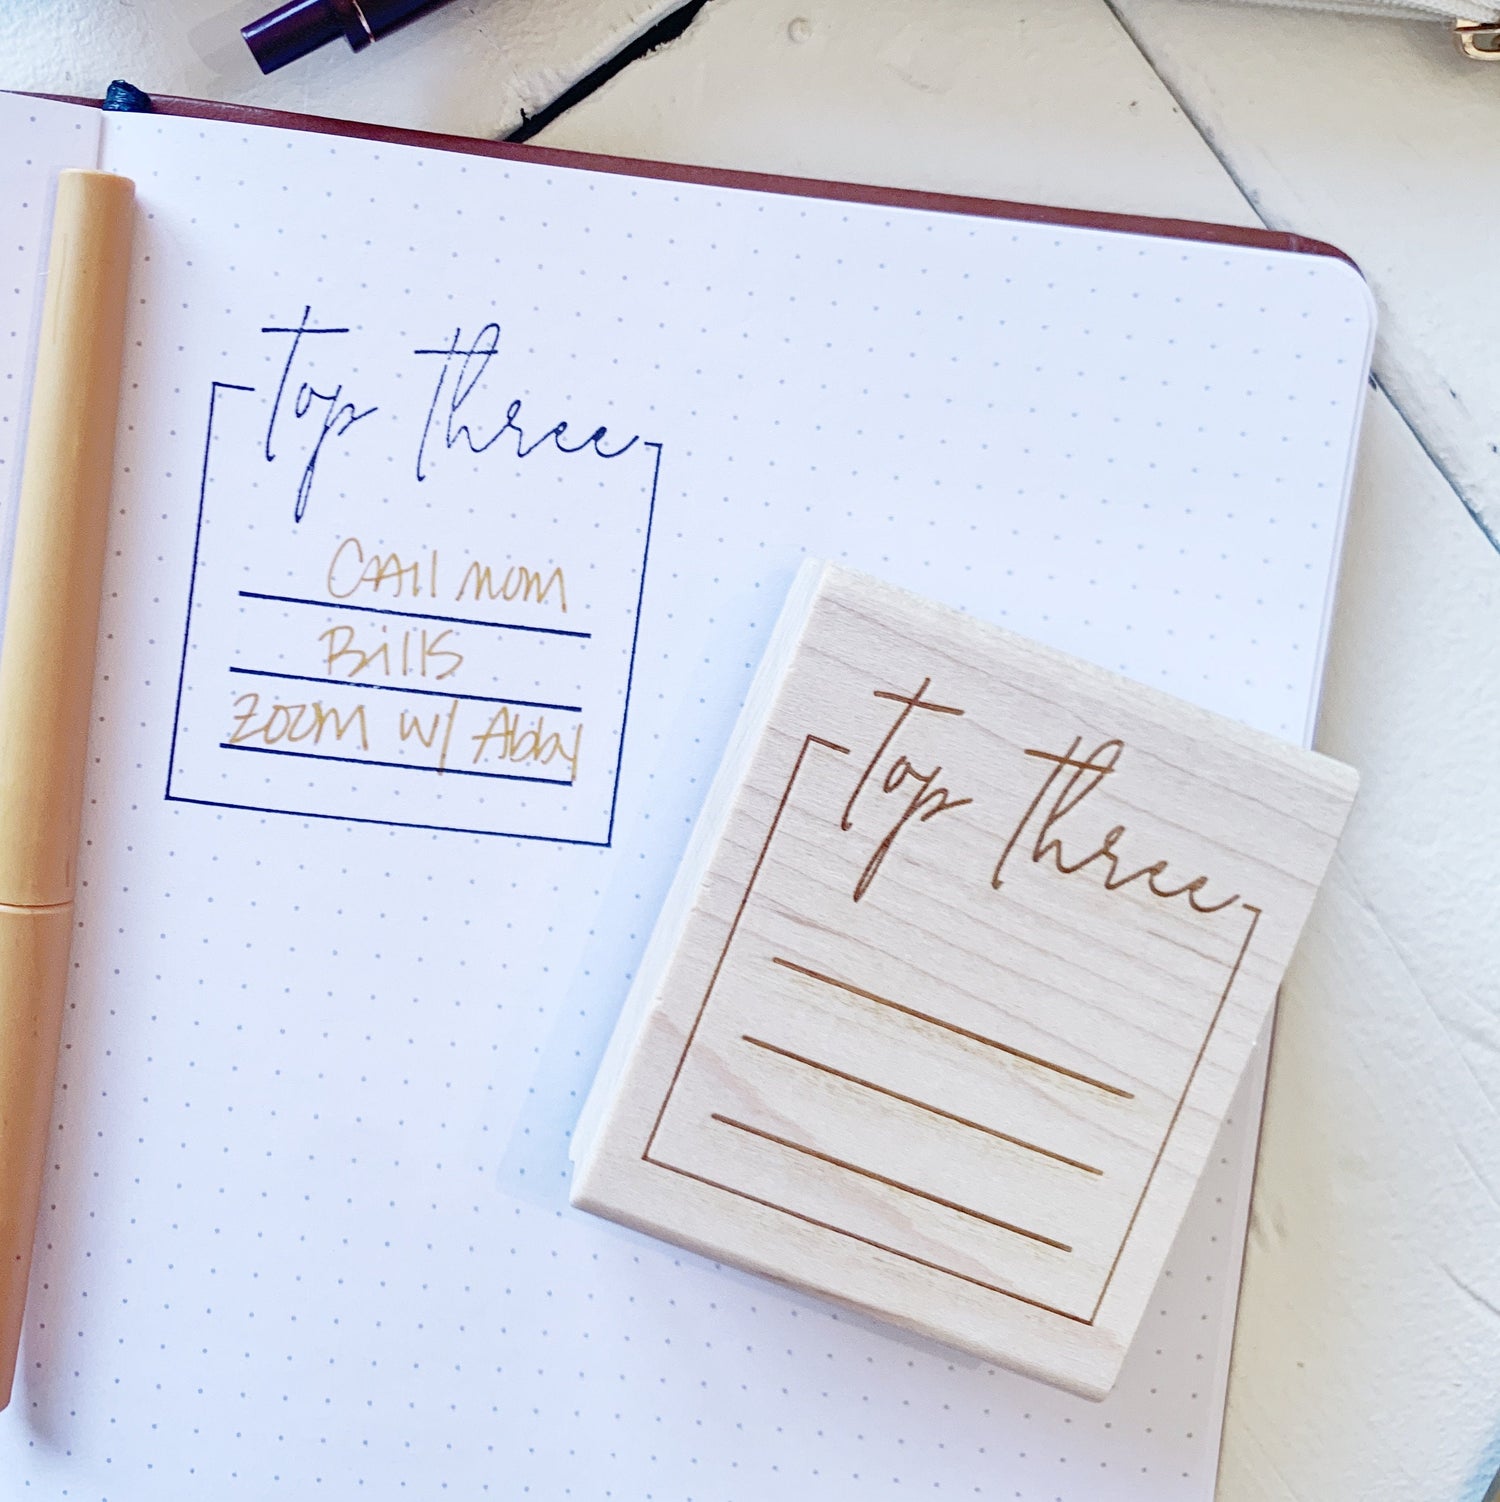 Planner or Journal stamp - Top 3